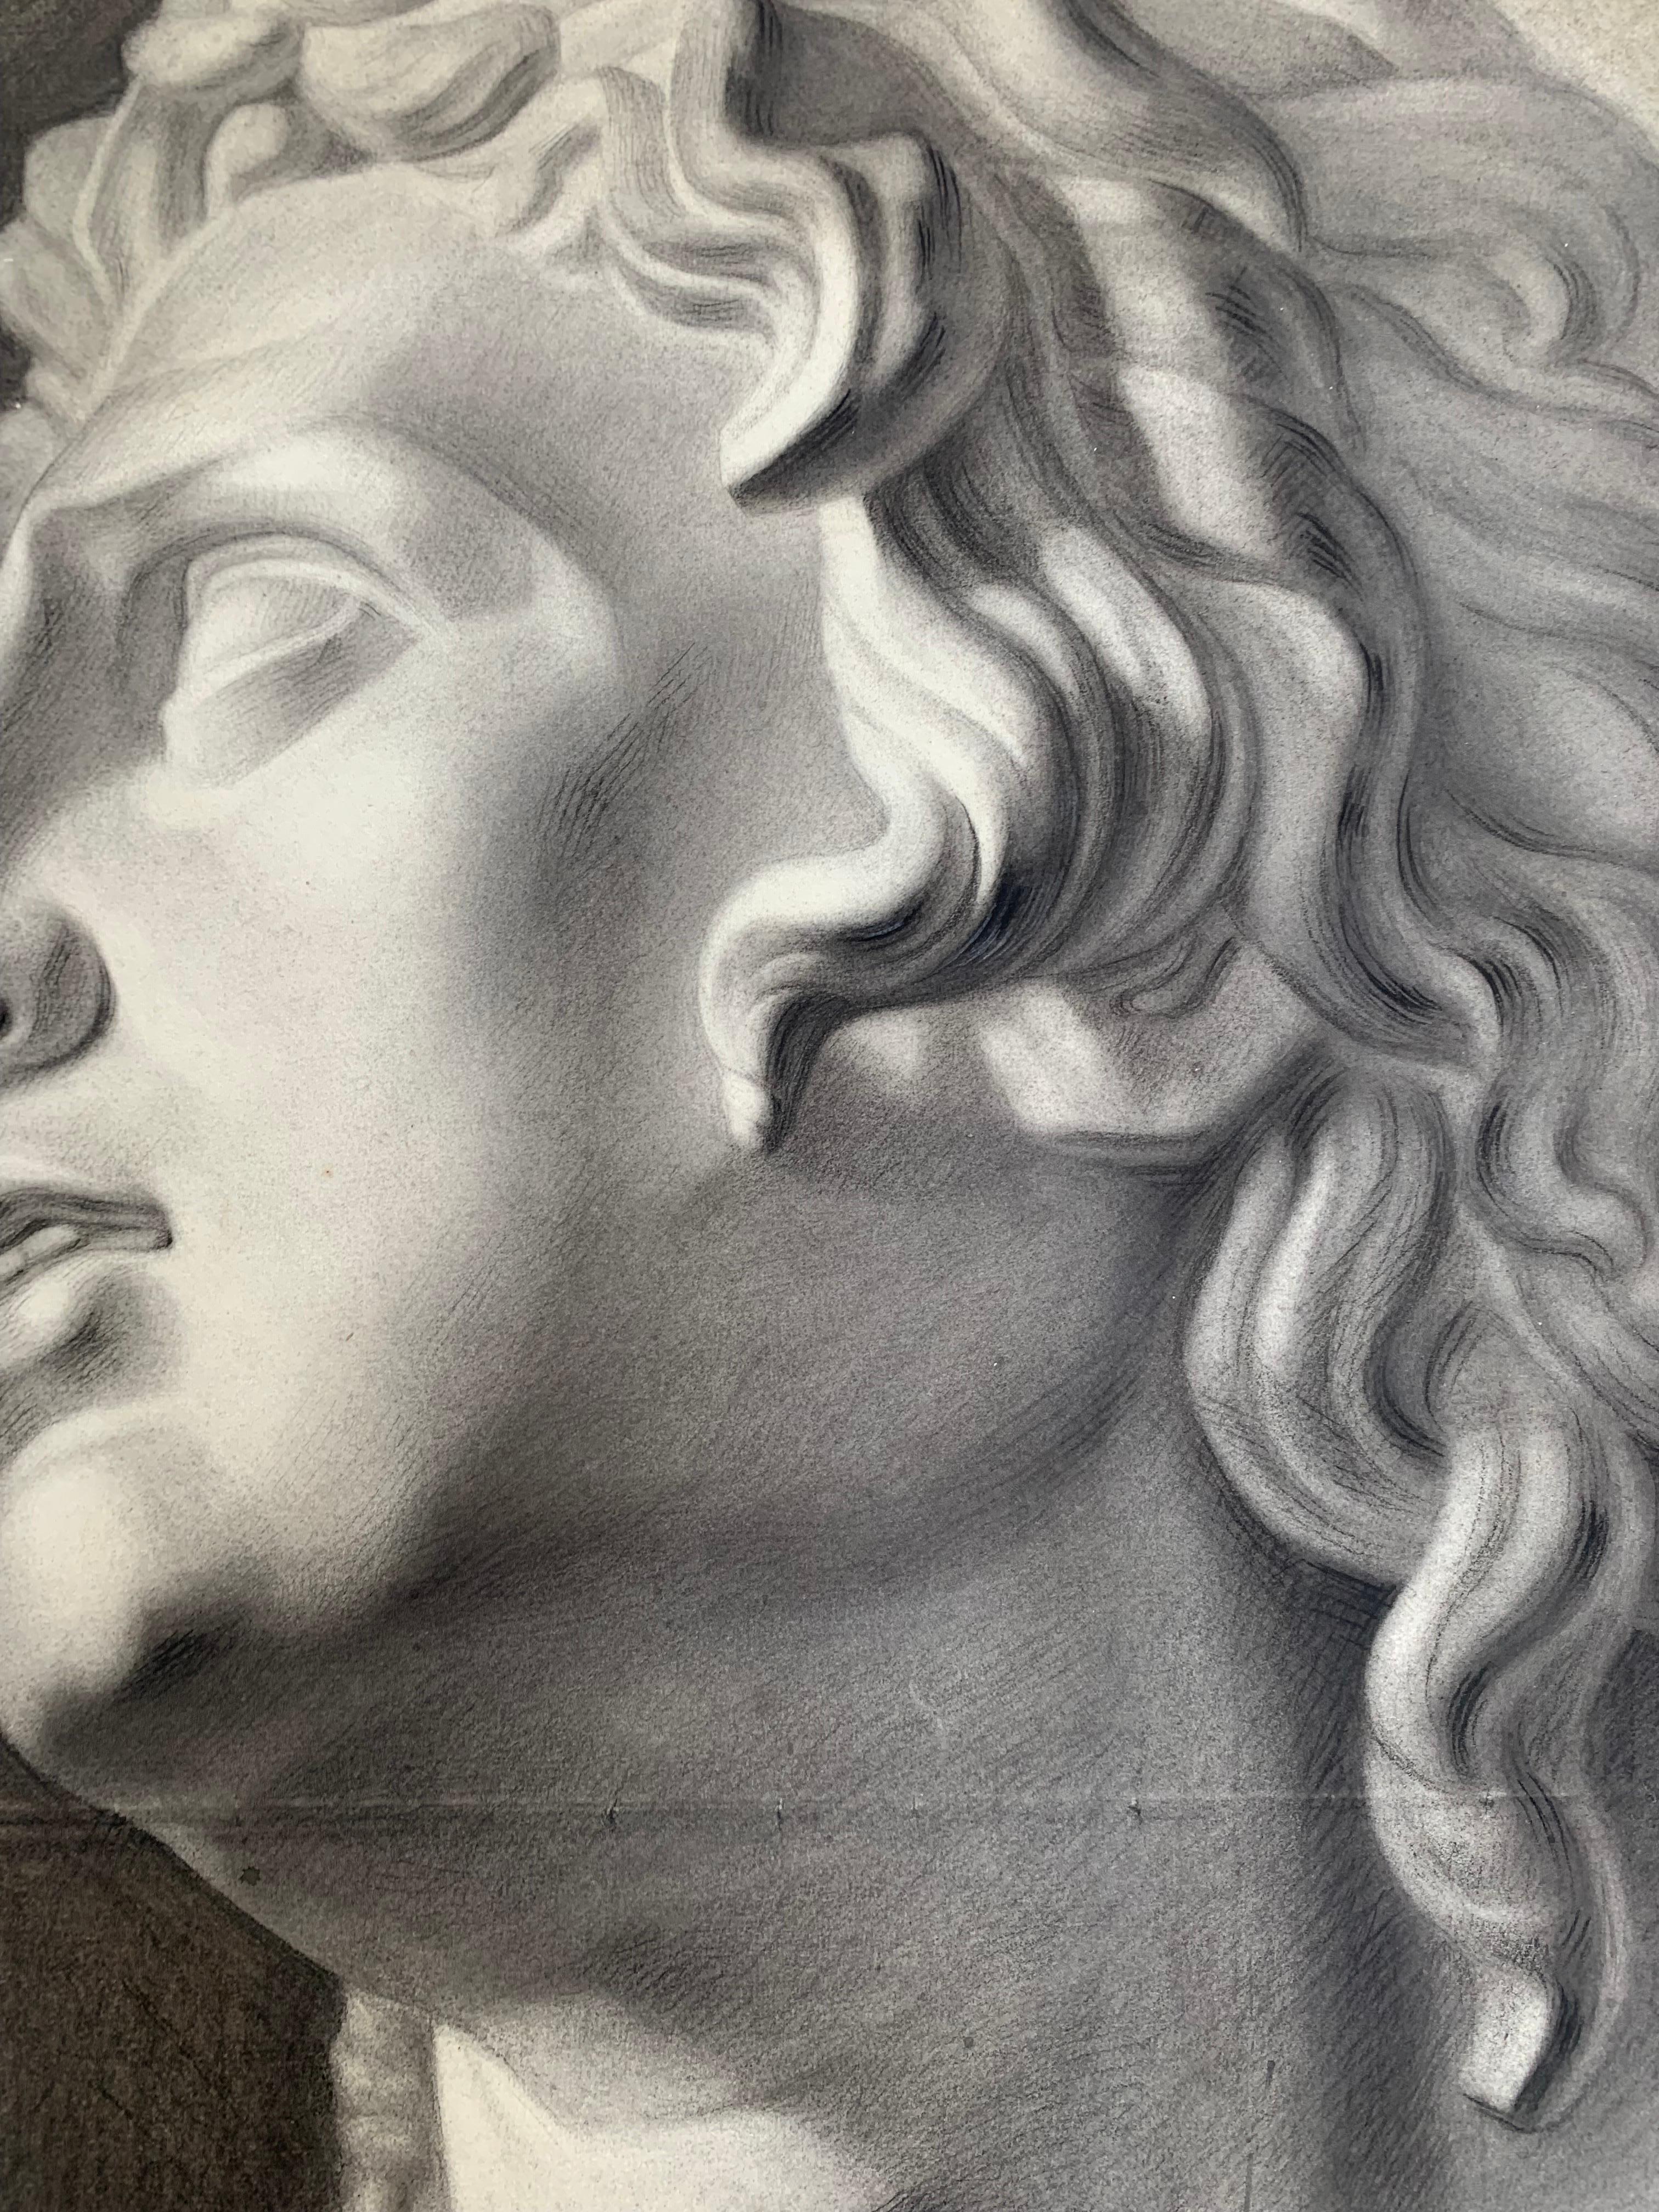 Large Academic drawing of Alexander The Great’s bust  sculpture.
XIX century drawing. 

Dimension: cm 73,5 x cm 44,5

Study of plaster after a the Hellenistic sculptural masterpiece of Dying Alexander the Great, which is housed in the Uffizi's